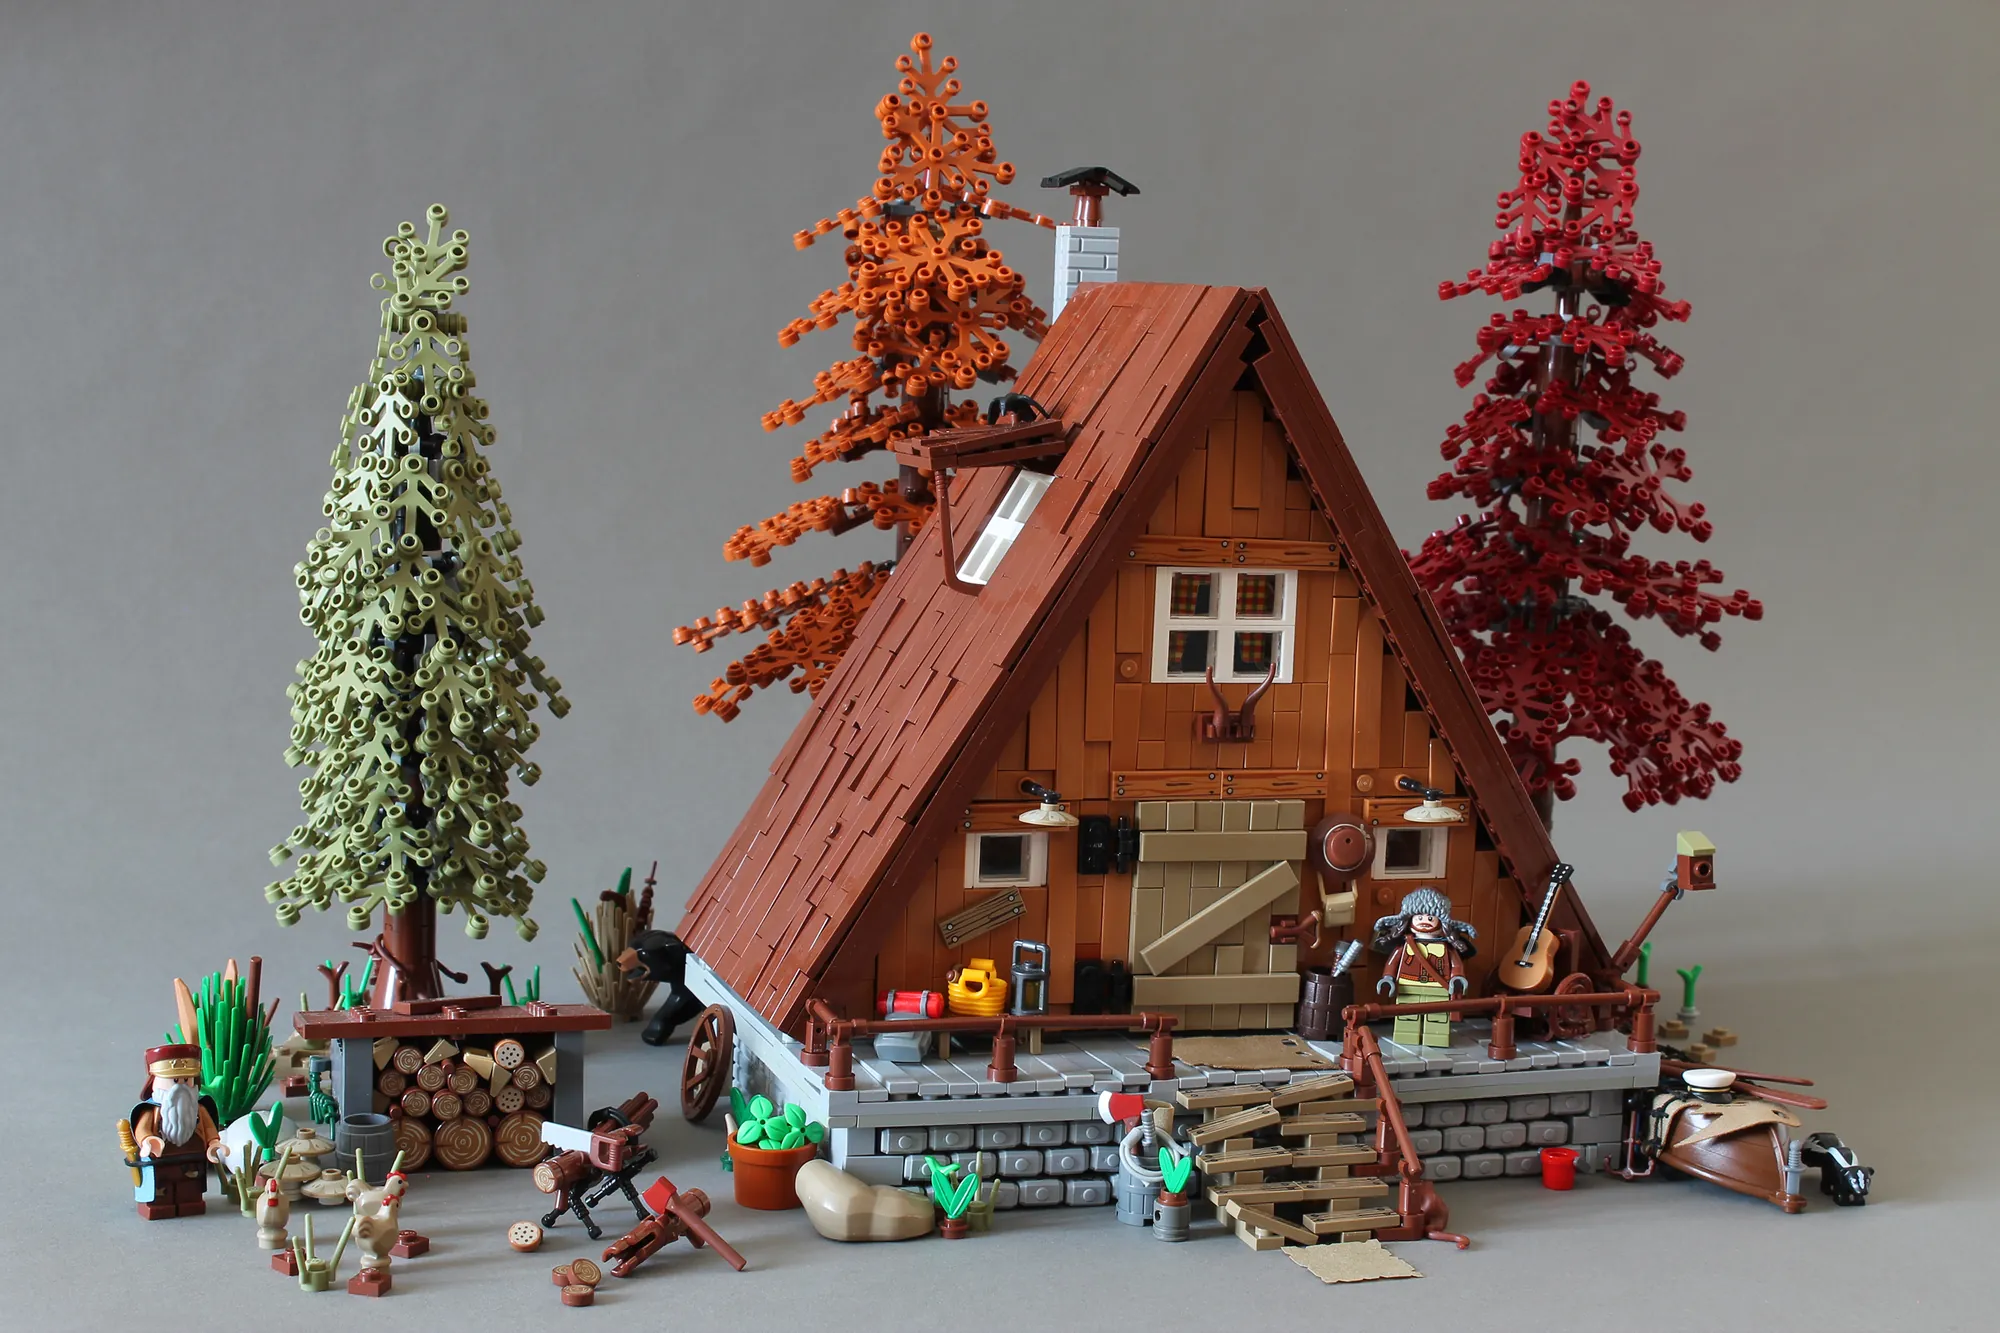 A-Frame Cabin - LEGO Ideas Submission.png